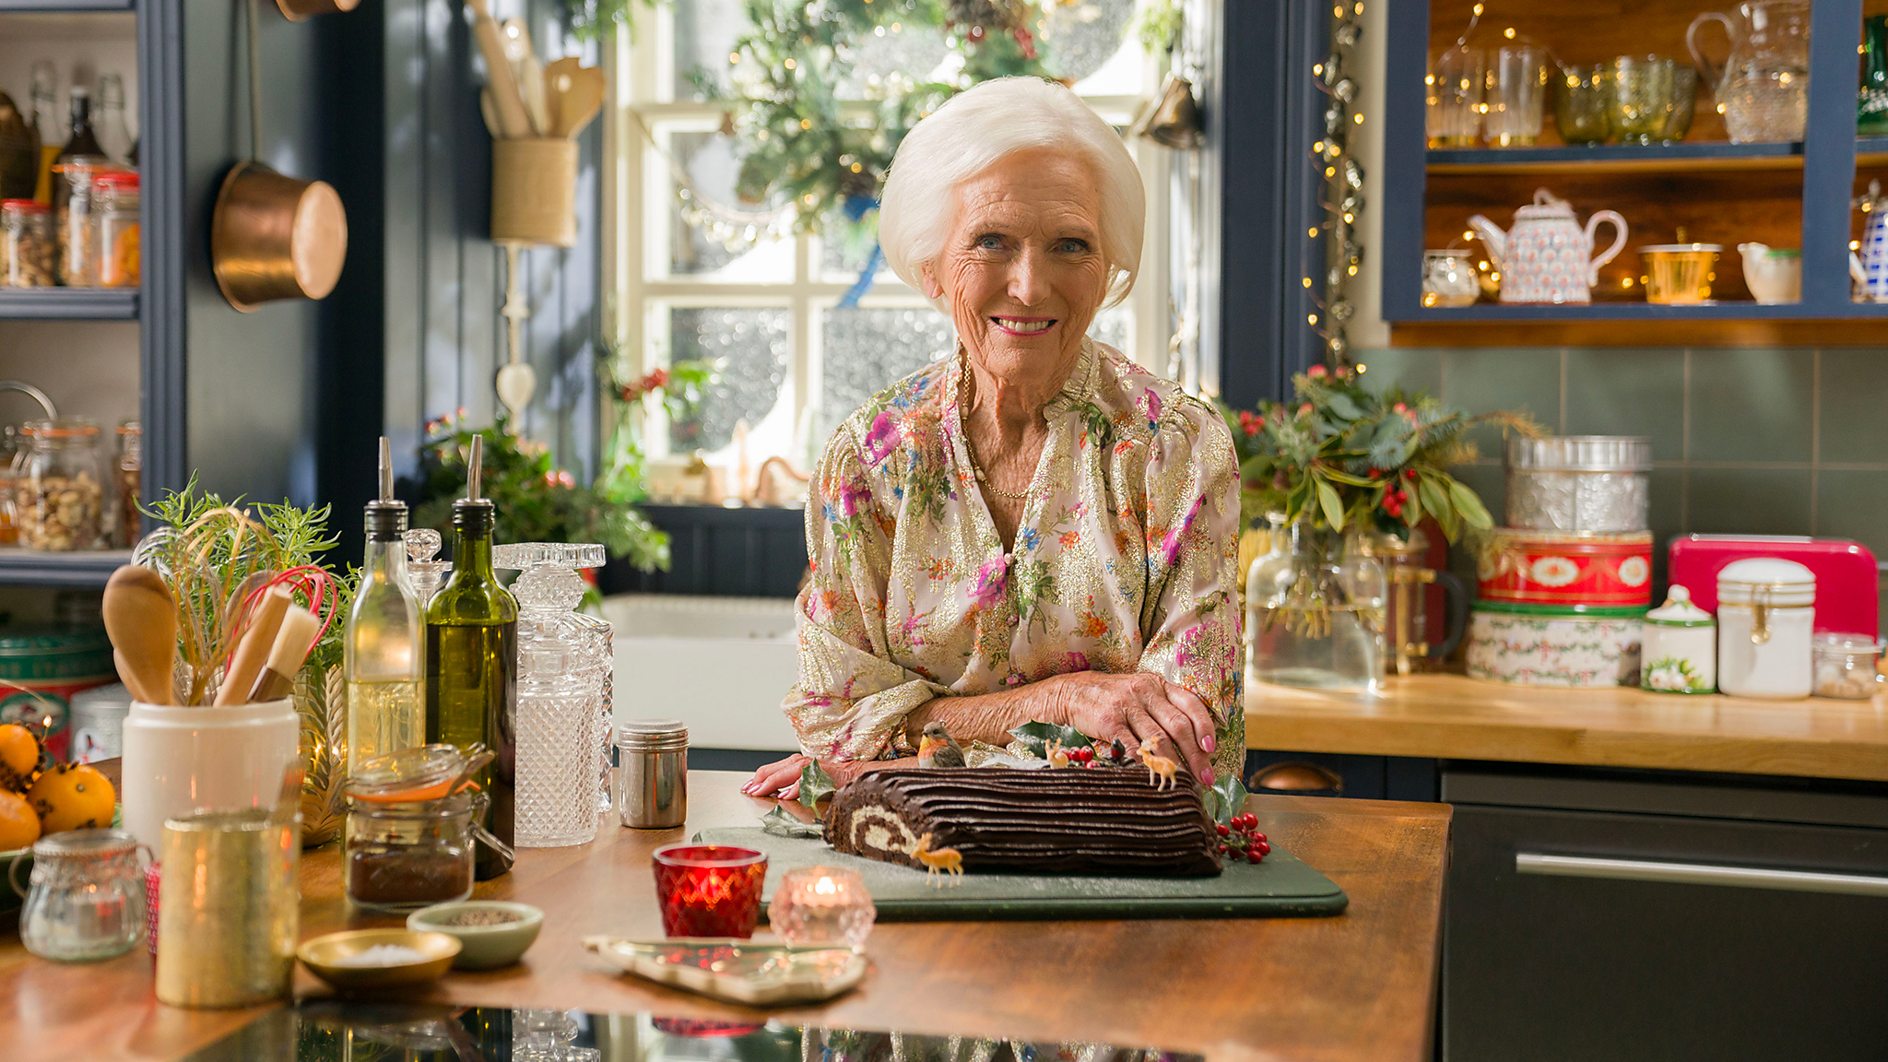 Mary Berry serves up Scottish Highland Christmas memories with Andy Murray, Emeli Sandé